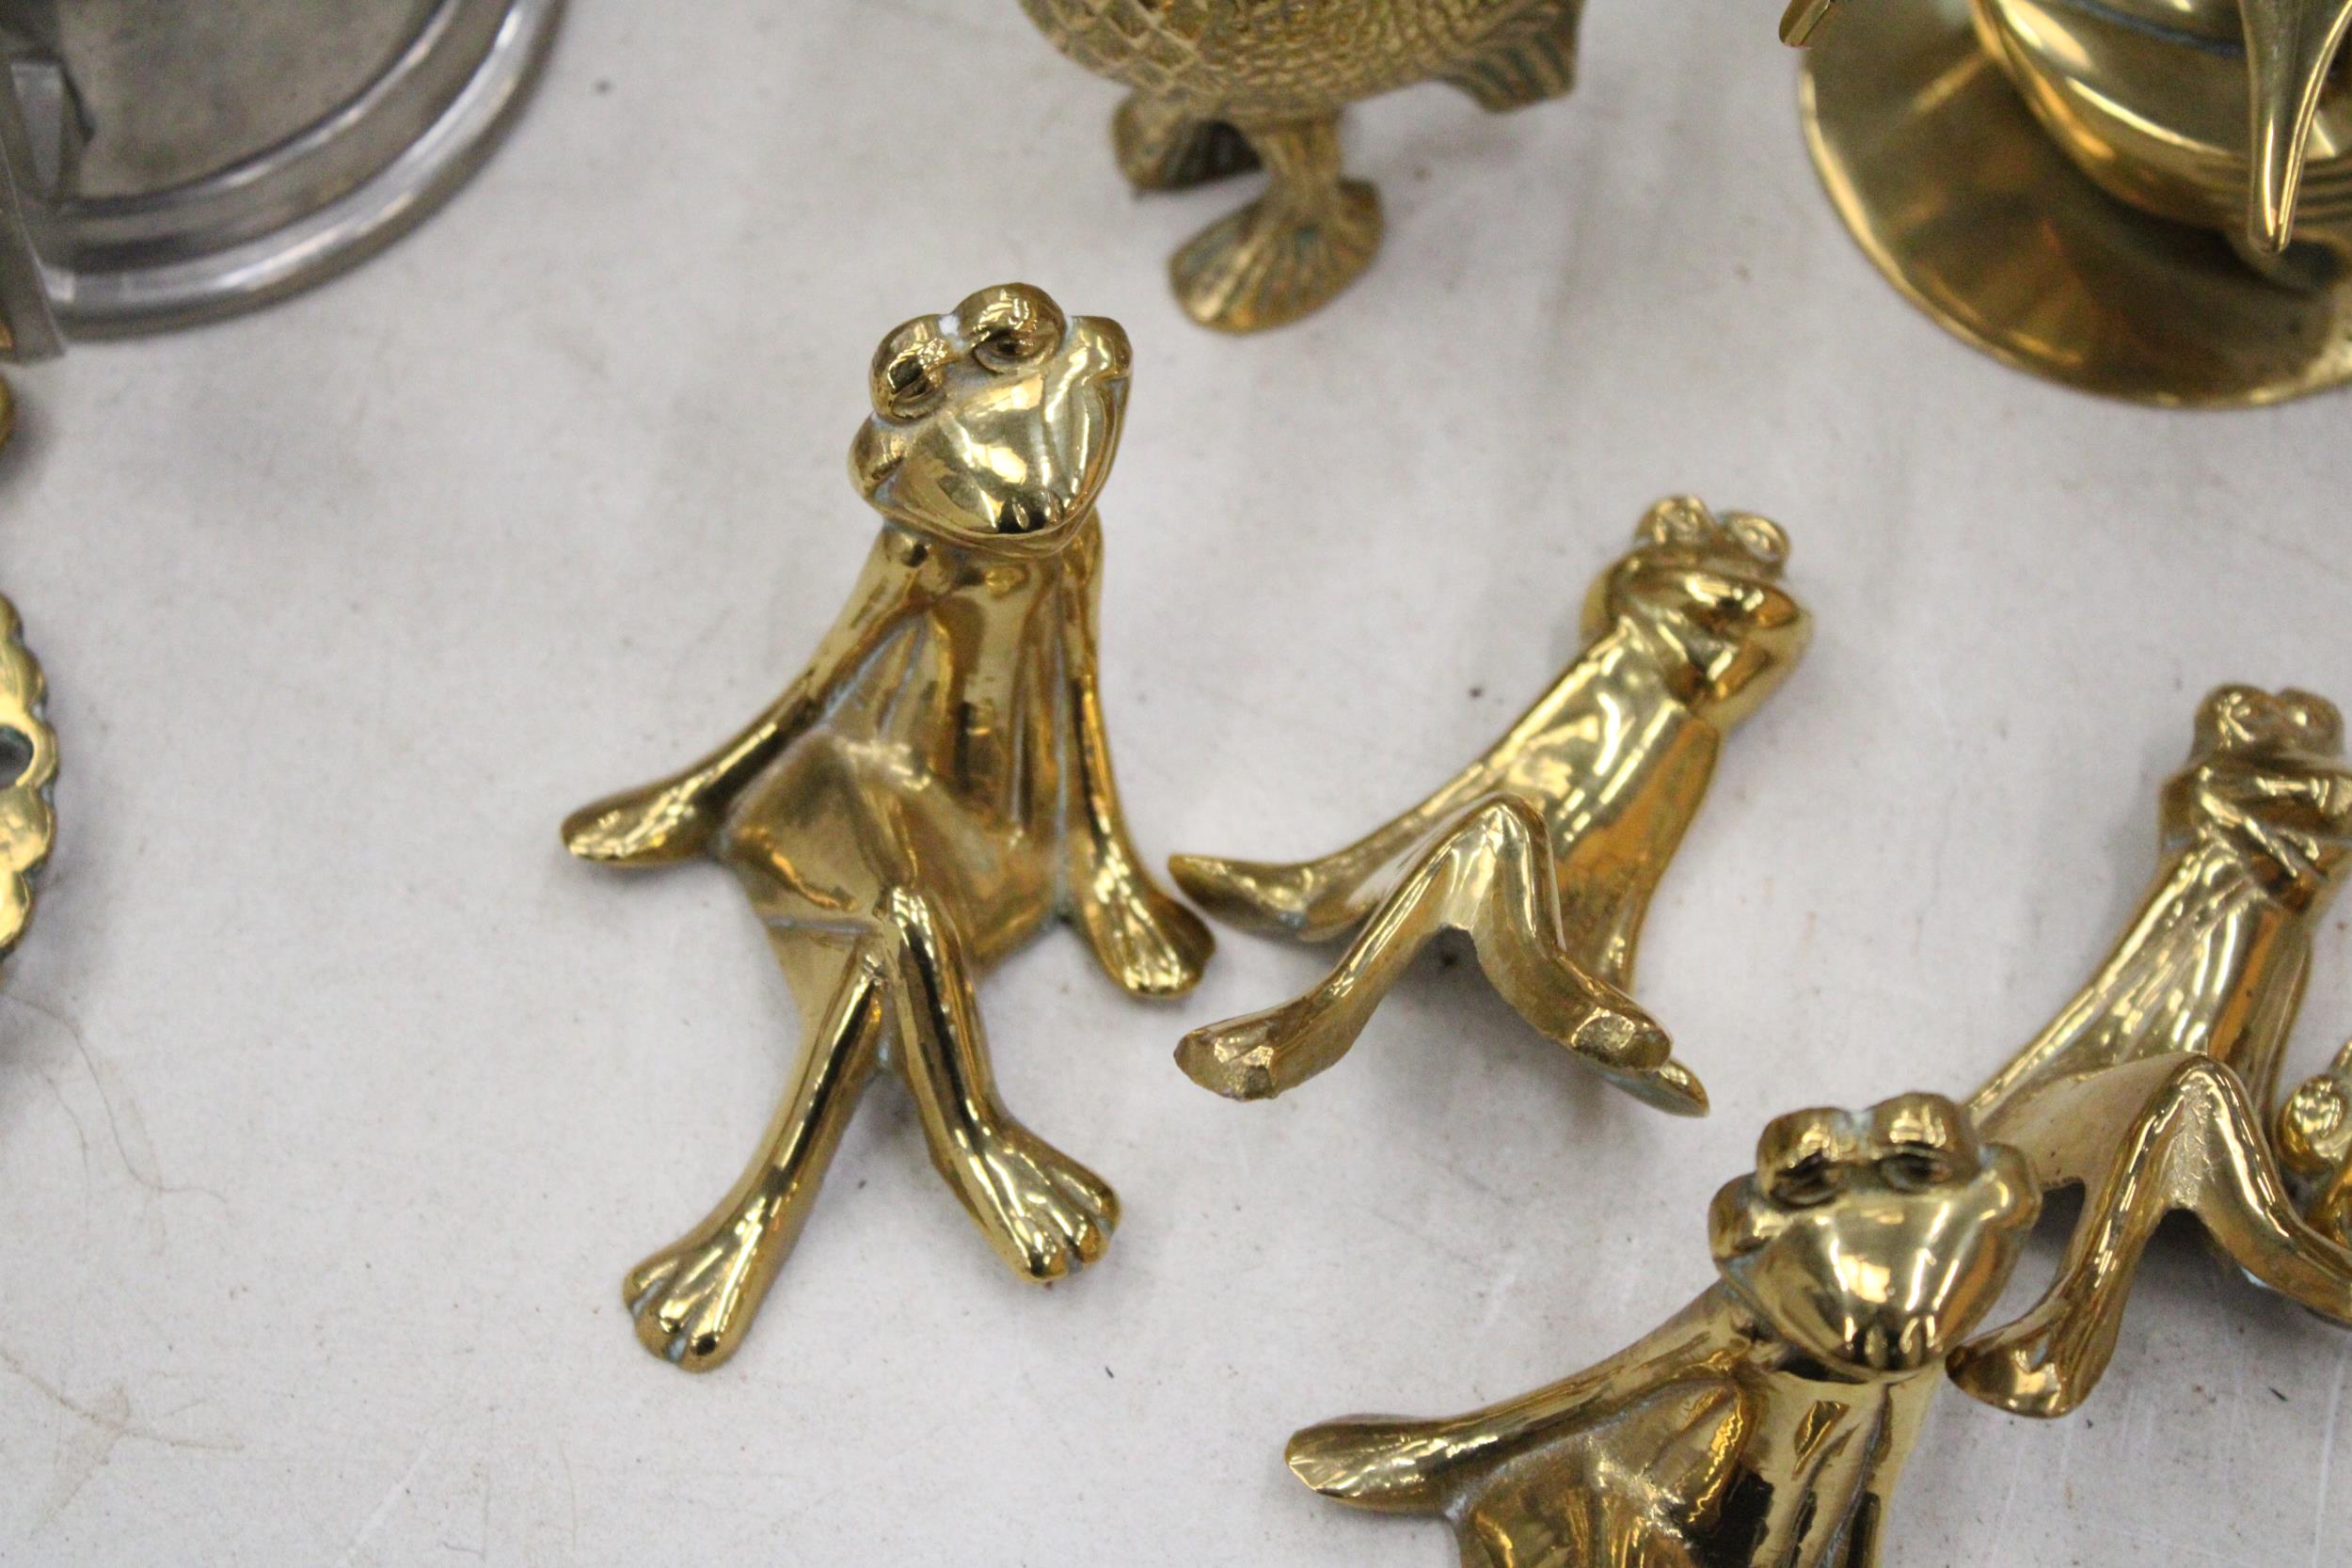 A MIXED LOT OF ANIMAL ORNAMENT BRASSWARE TO INCLUDE FROGS, DUCKS AND OWL - Image 7 of 7